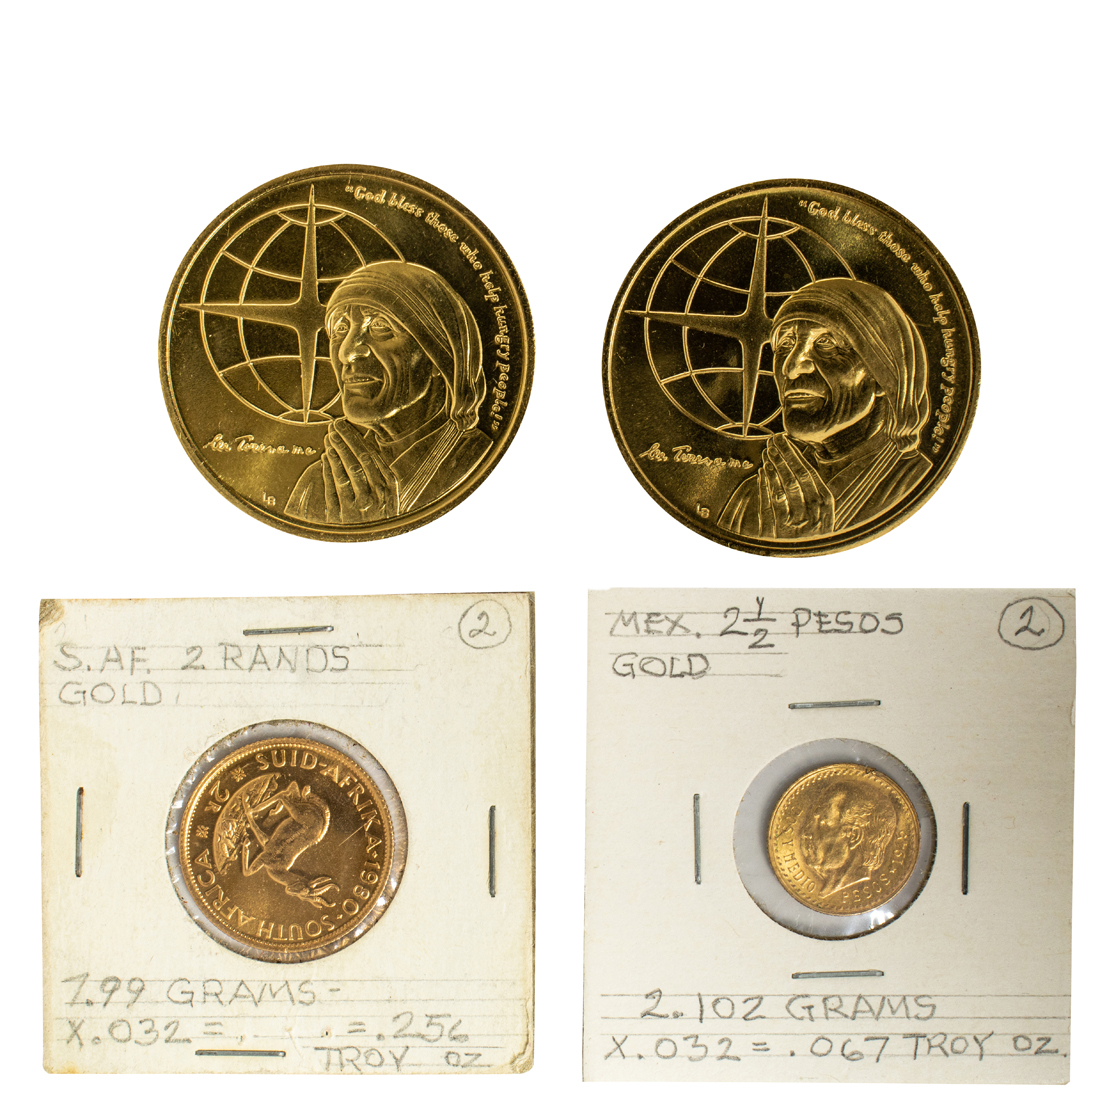 TWO FOREIGN GOLD COINS: 1945 2